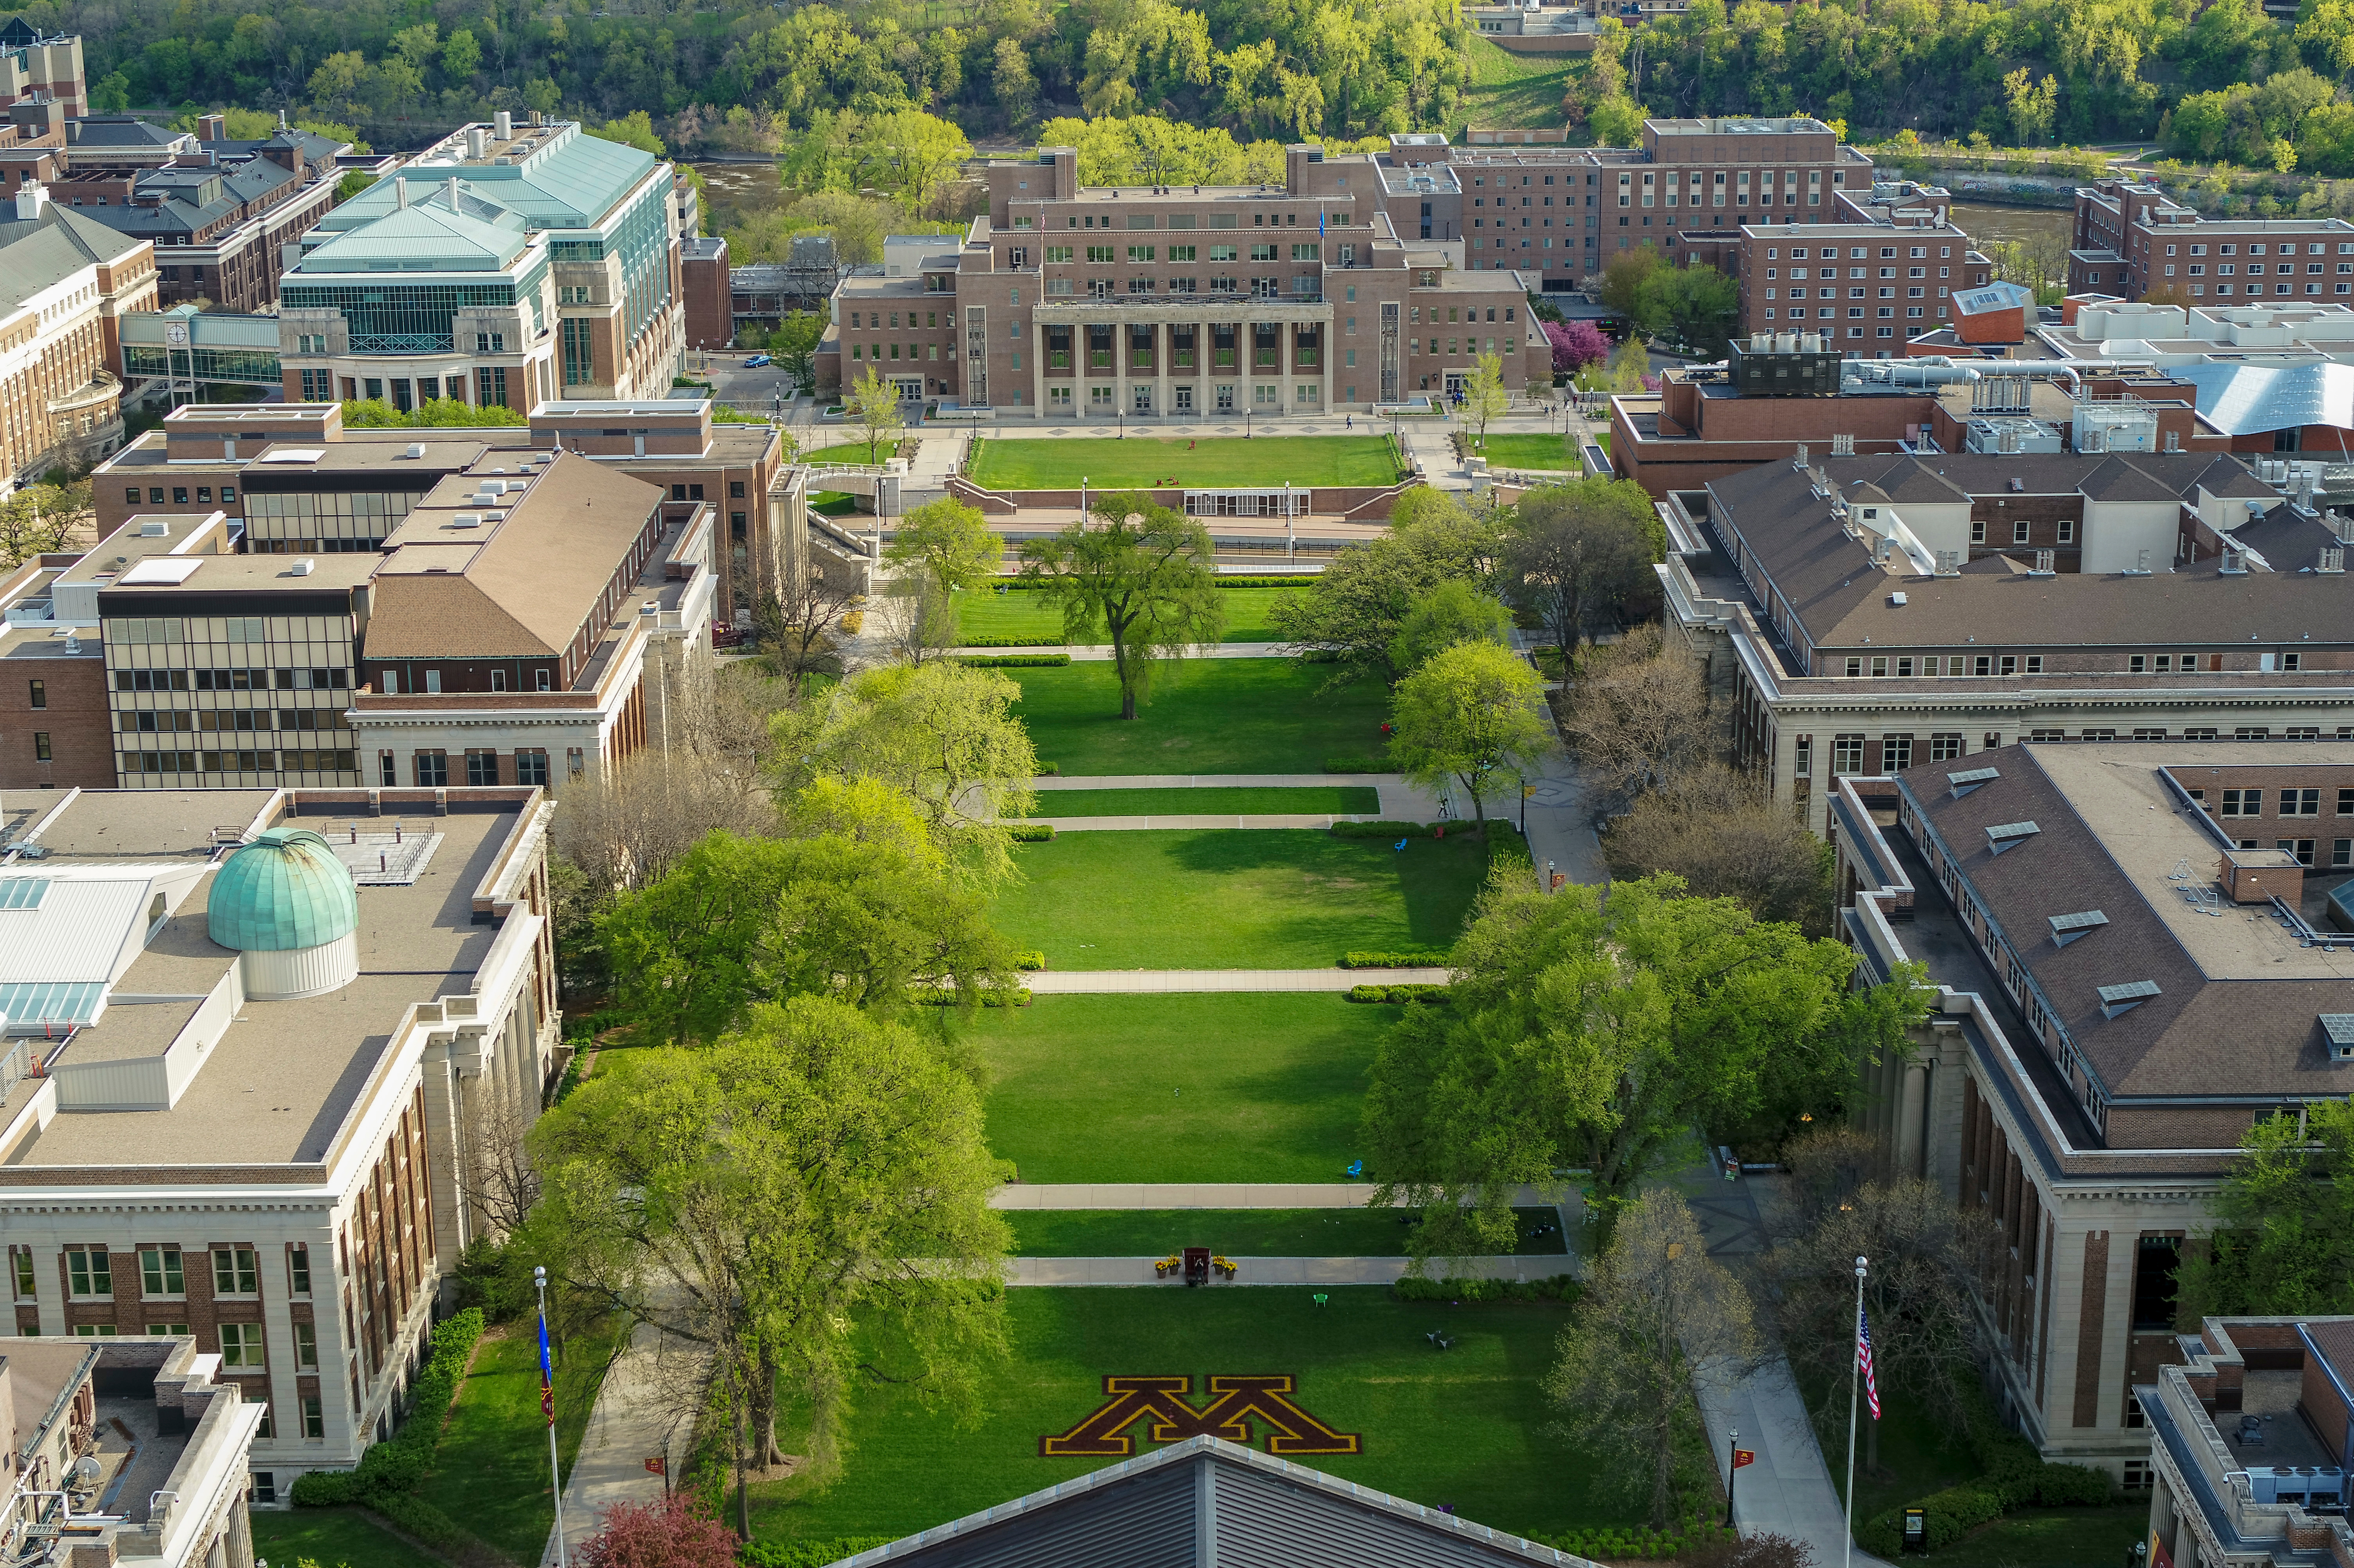 View of Northrop mall looking to the Student Union